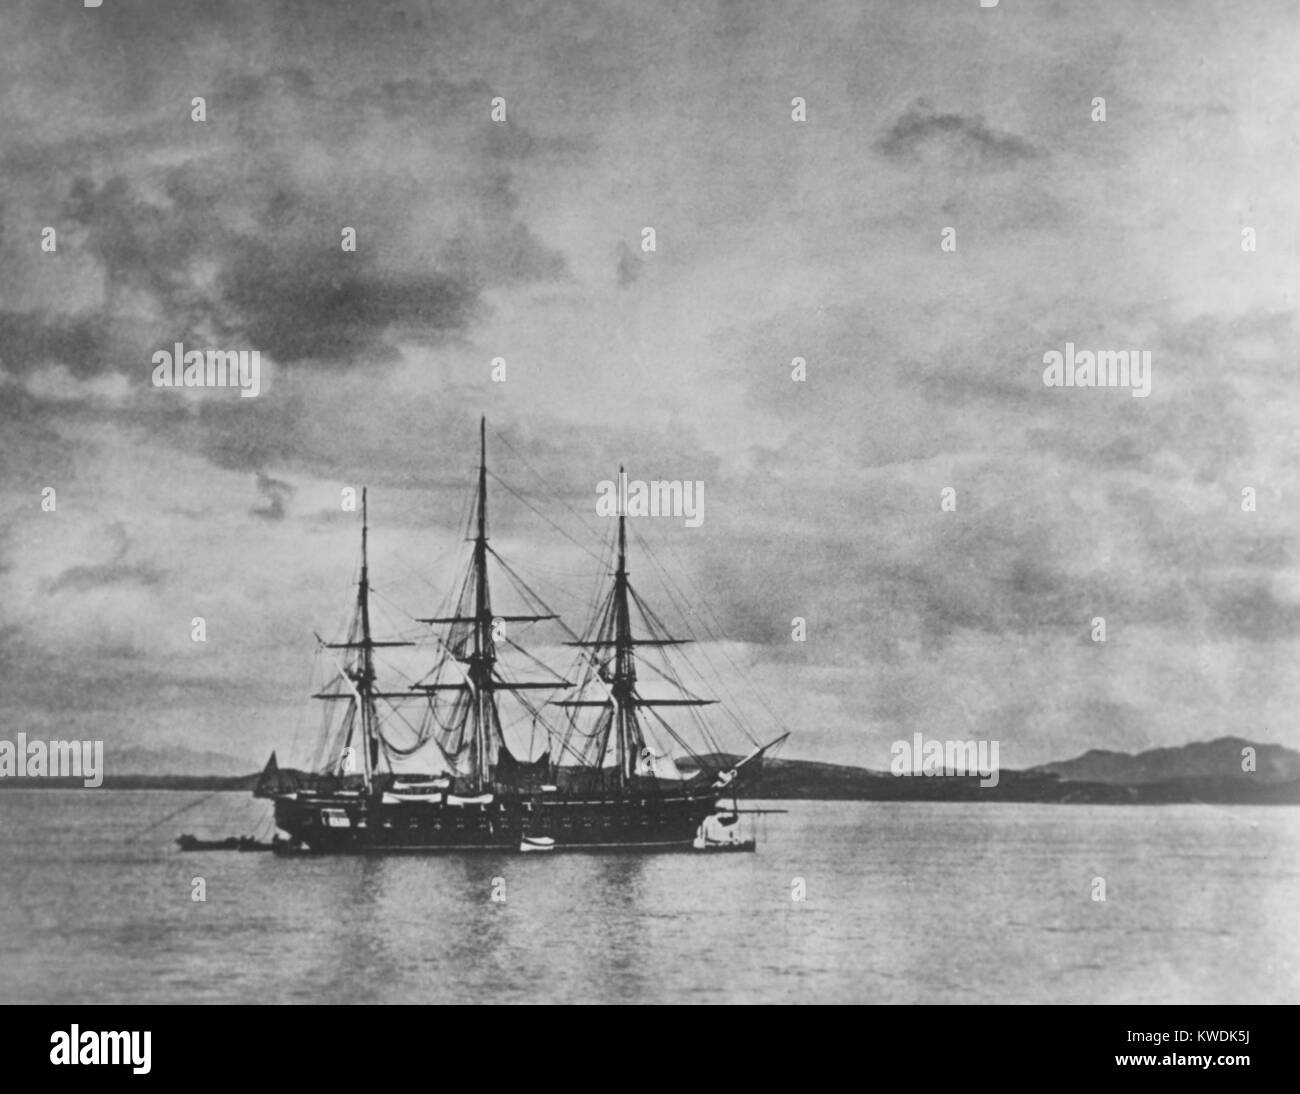 USS Frigate COLORADO in the Han River, Korea, during the Korean expedition of May-June, 1871. It was the flagship of a squadron seeking to open commercial and diplomatic relations with the Hermit Kingdom. The ship was a three-masted, steam screw, frigate launched in 1856. Photo by Felice Beato (BSLOC 2017 18 61) Stock Photo